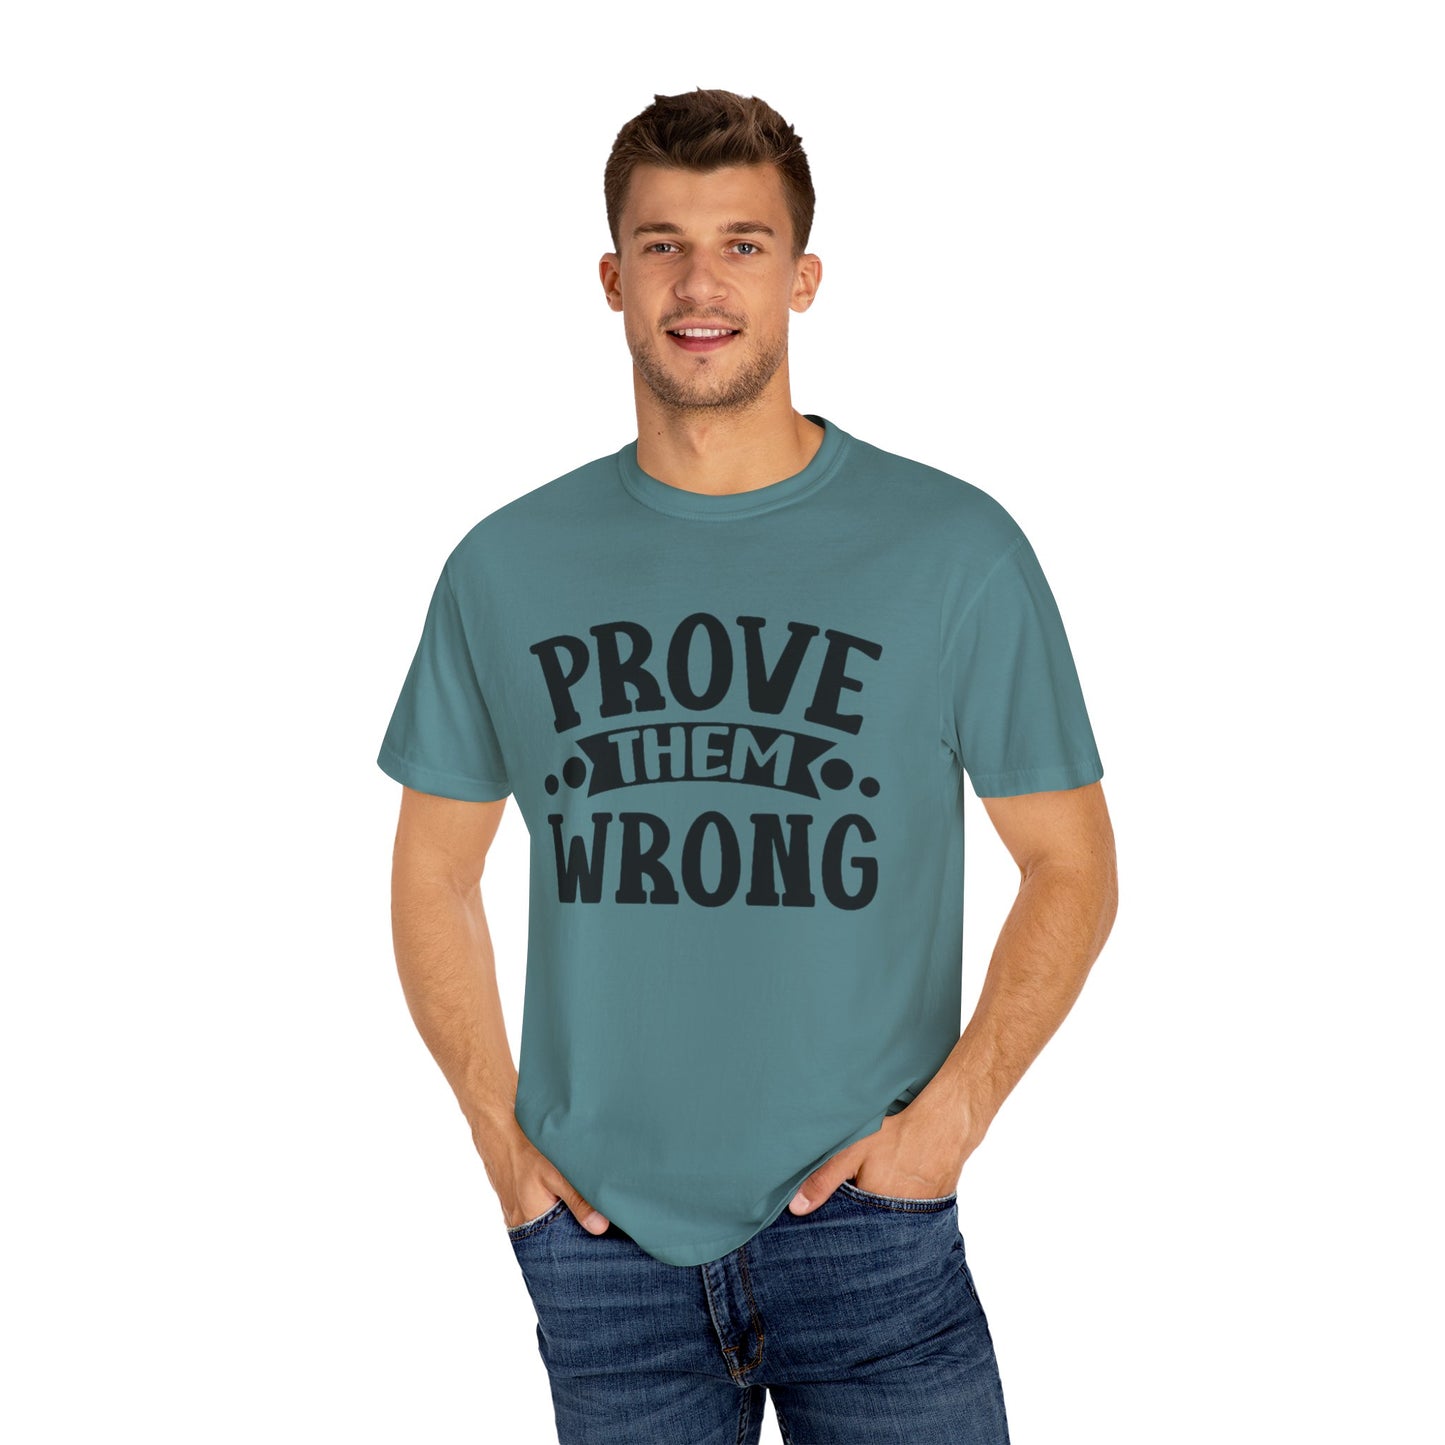 Prove them wrong- Unisex Garment-Dyed T-shirt